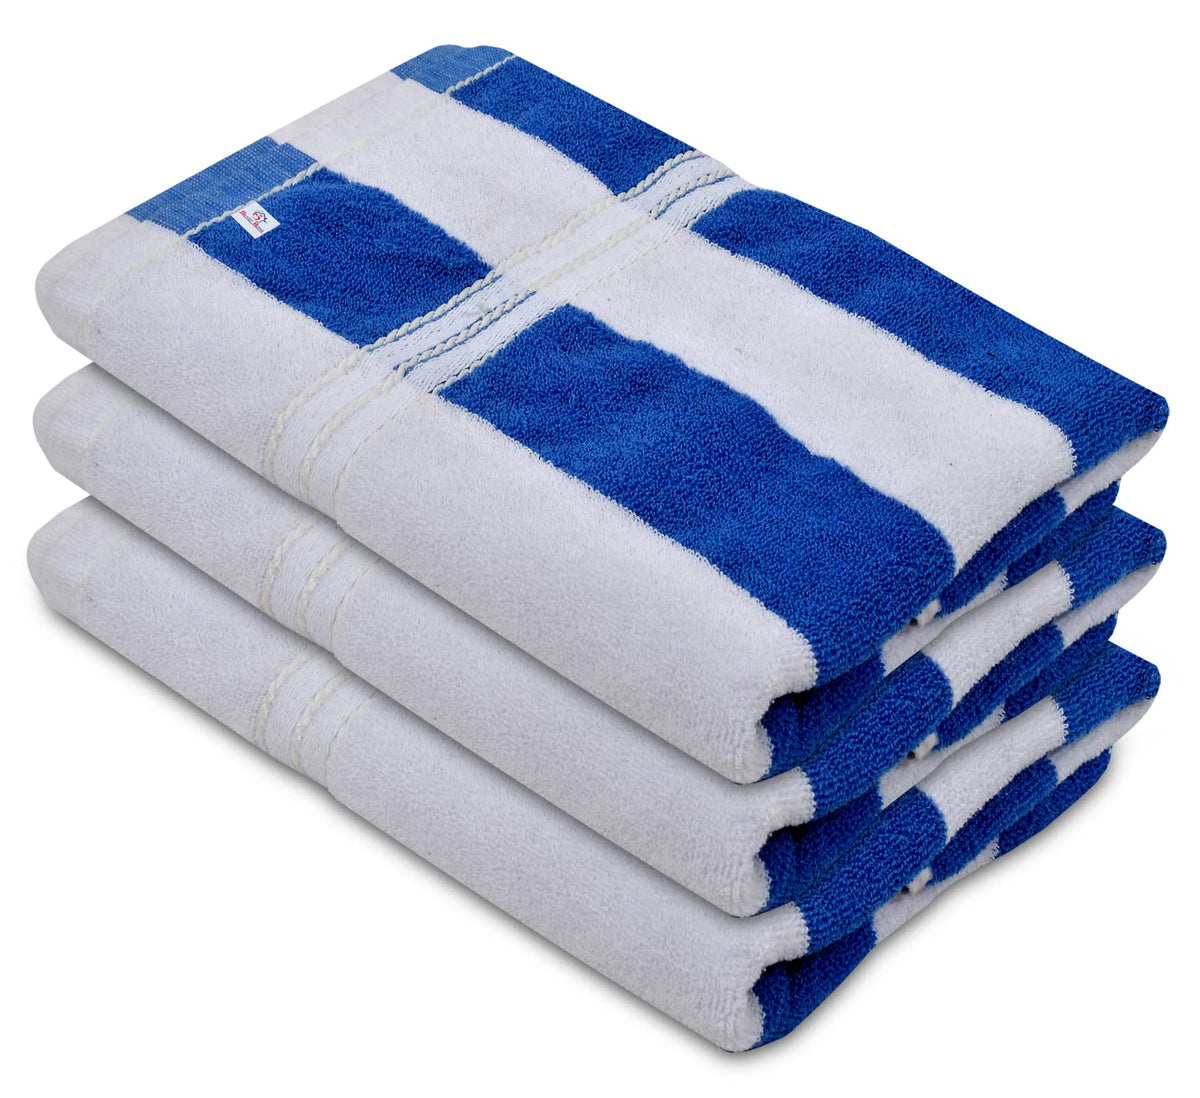 Heart Home Lining Design Soft Cotton Bath Towel, 30"x60", Pack of 3 (Blue & White)